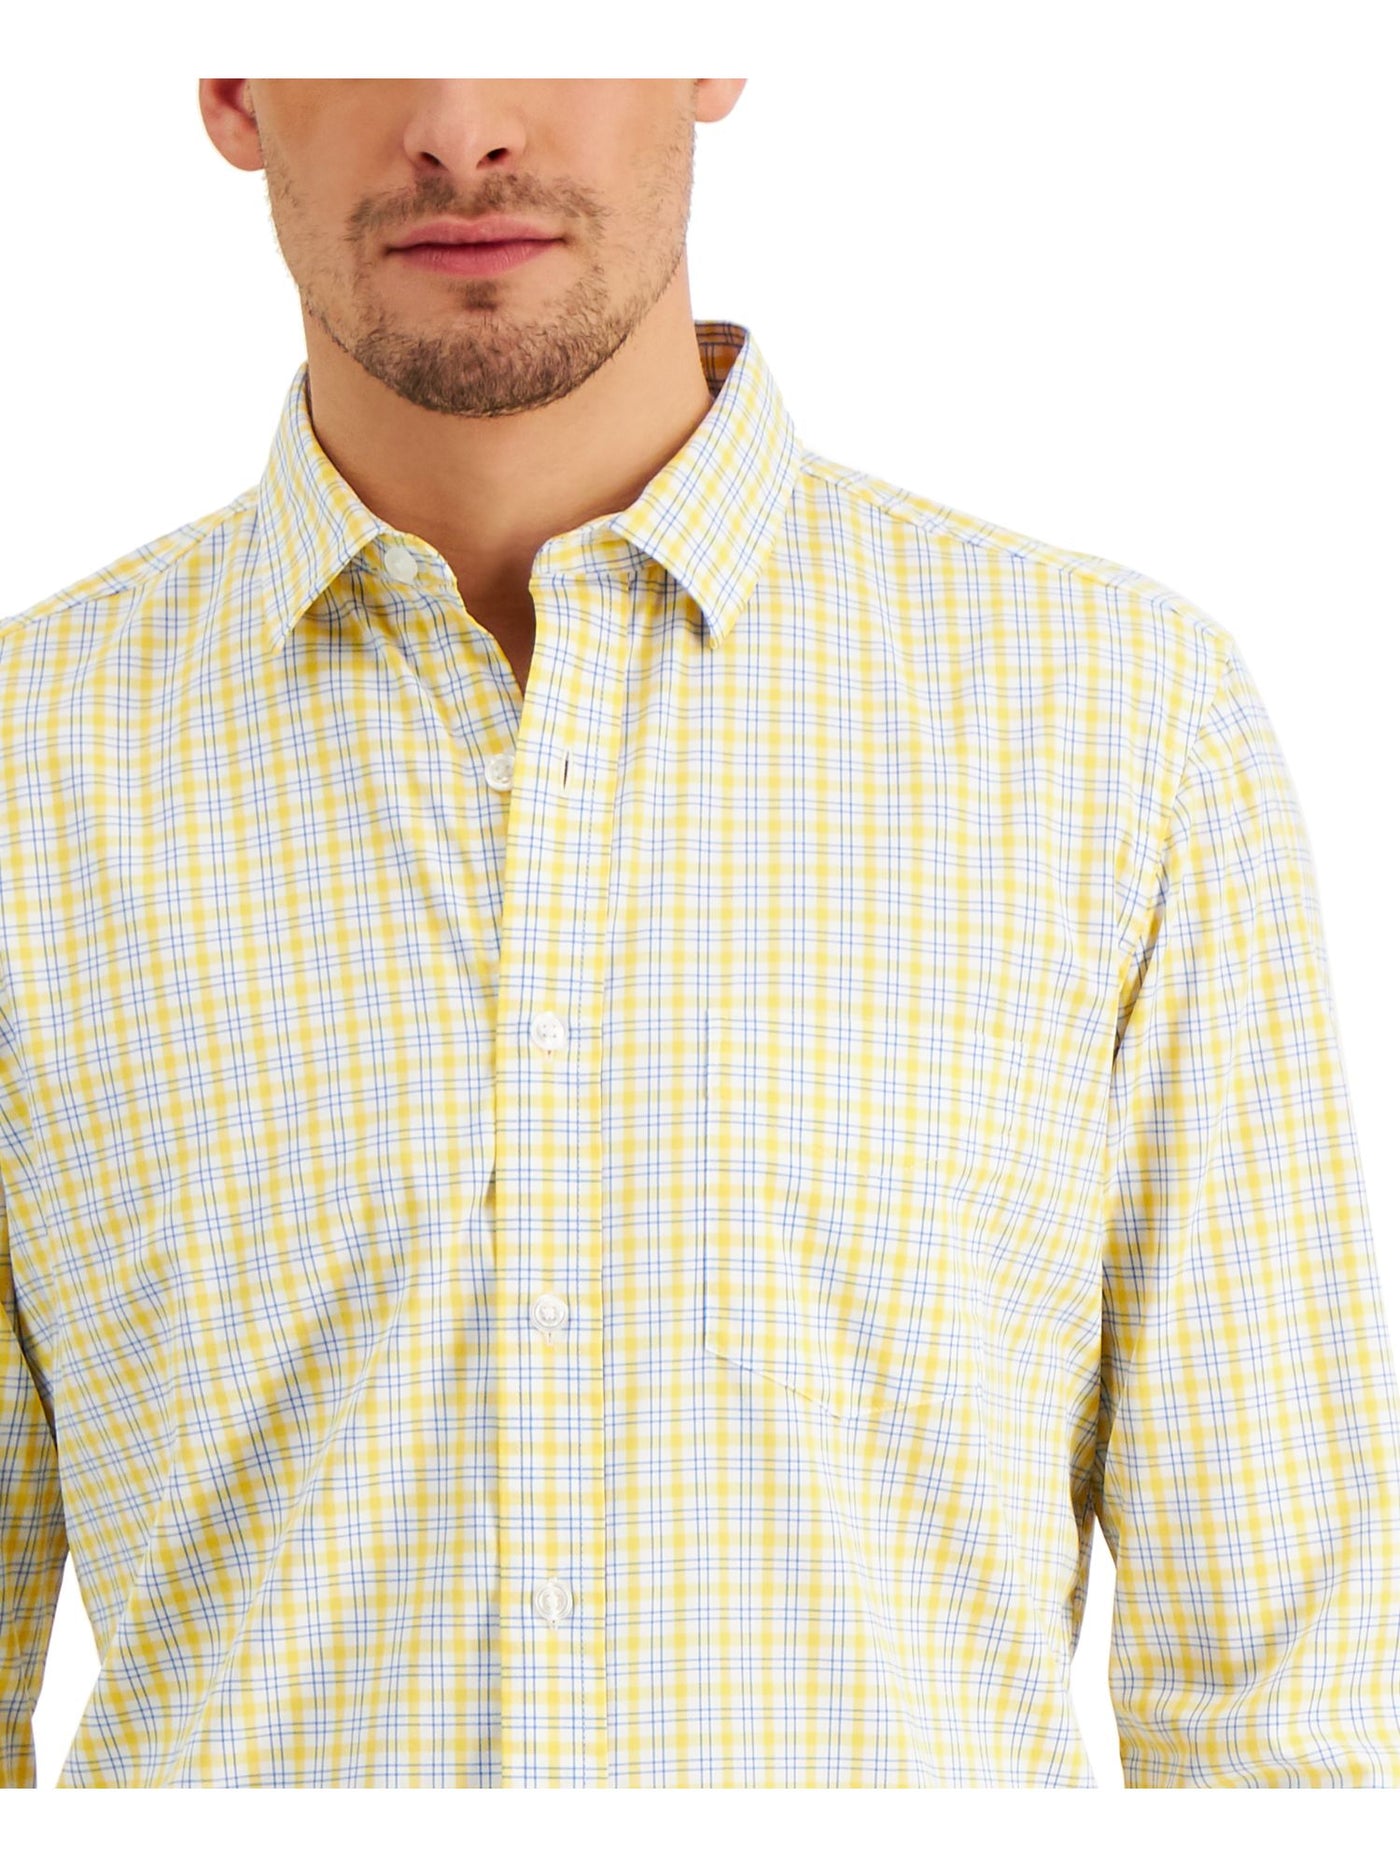 CLUBROOM Mens Yellow Lightweight, Pocket Plaid Long Sleeve Classic Fit Button Down Performance Stretch Casual Shirt S